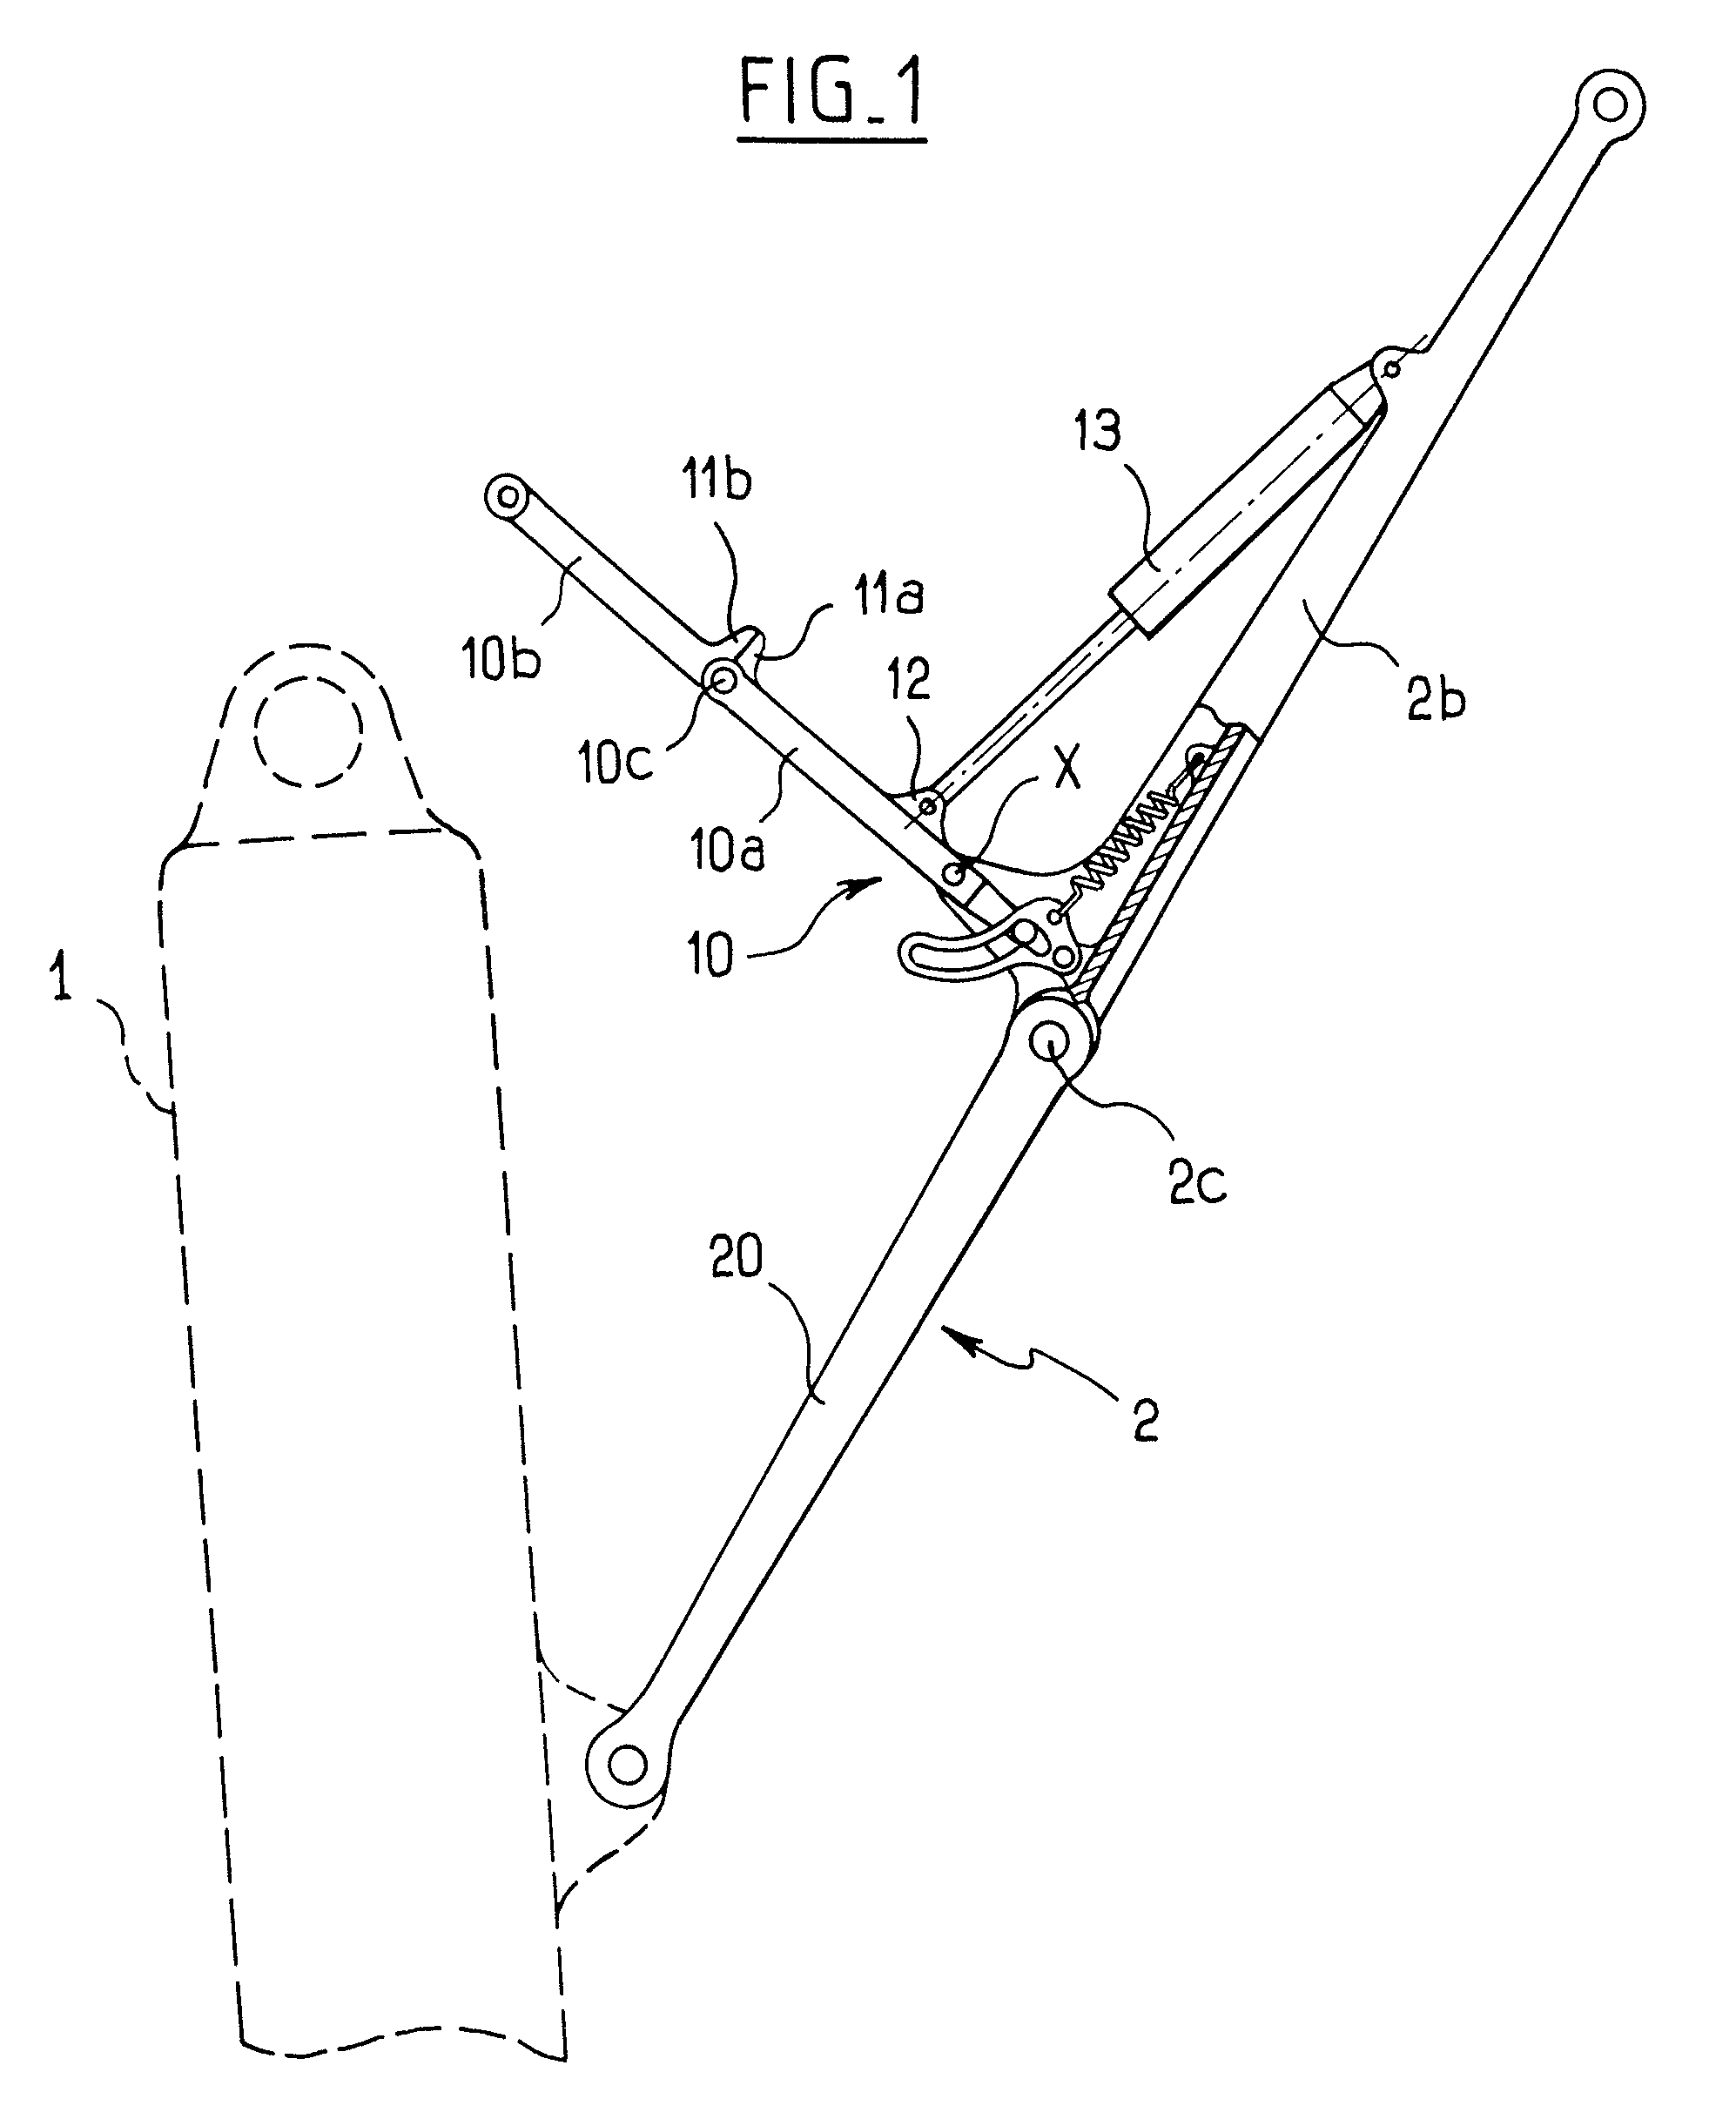 Brace-locking device for an aircraft undercarriage